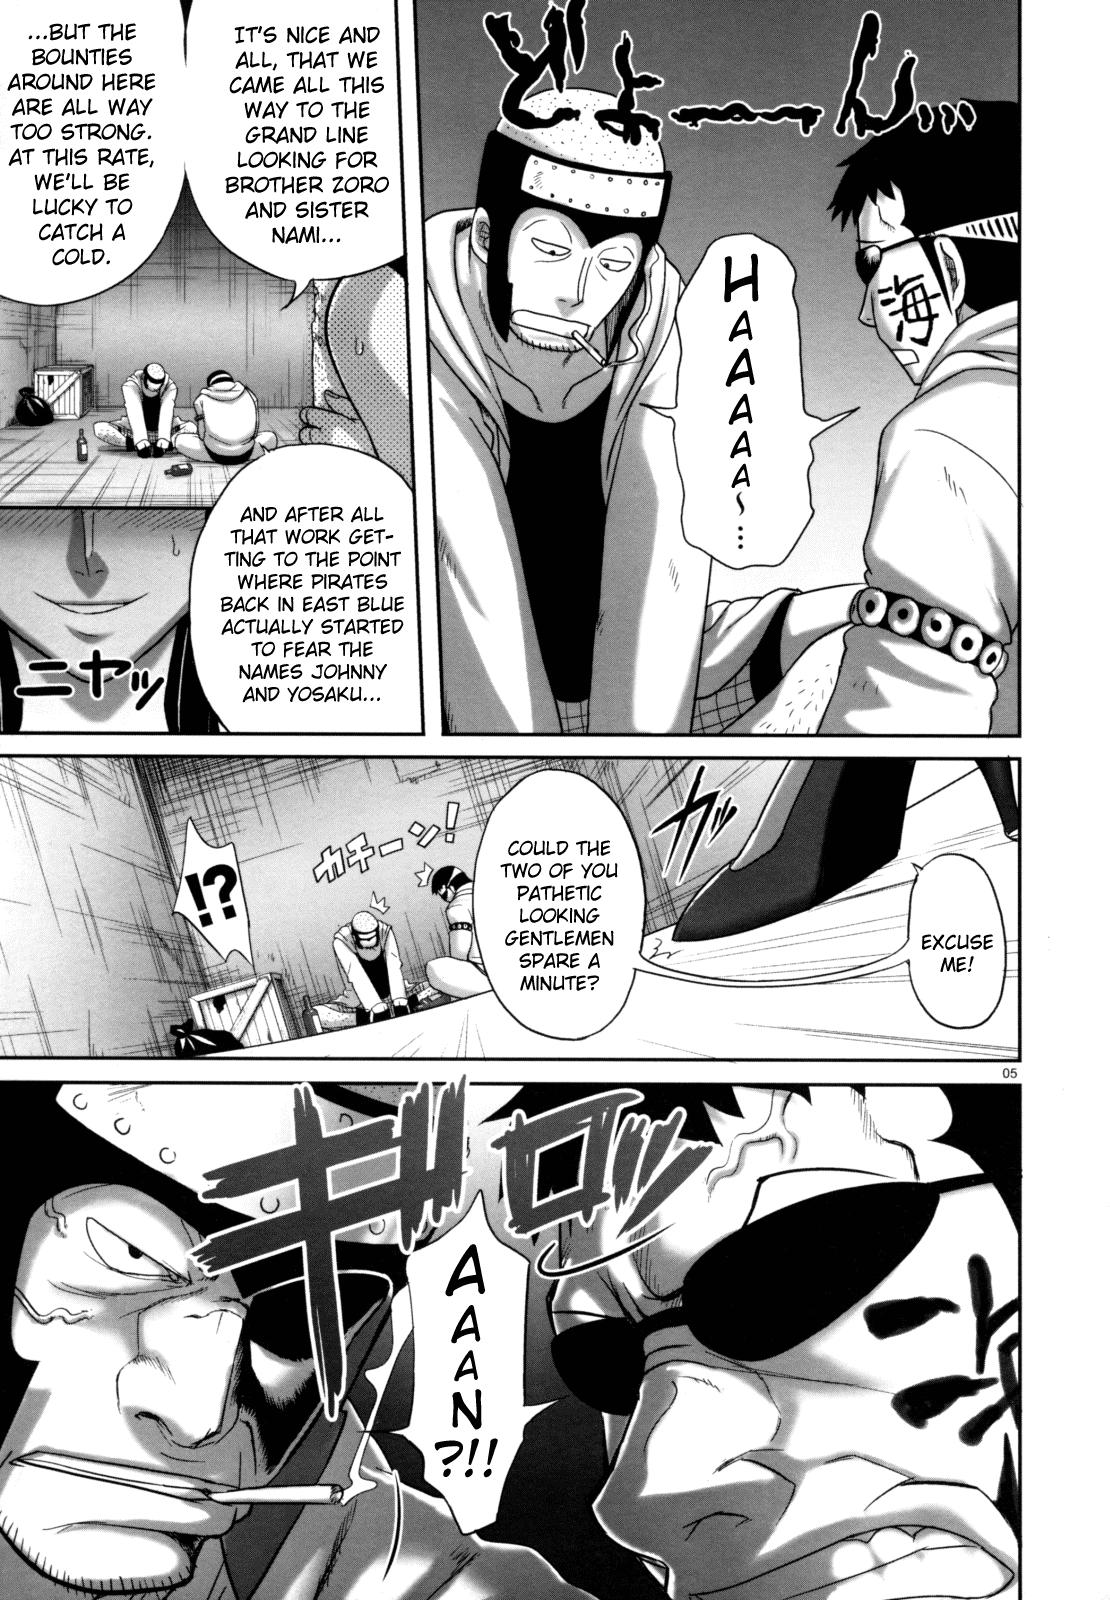 Pool Untimely Flowering - One piece Seduction - Page 4